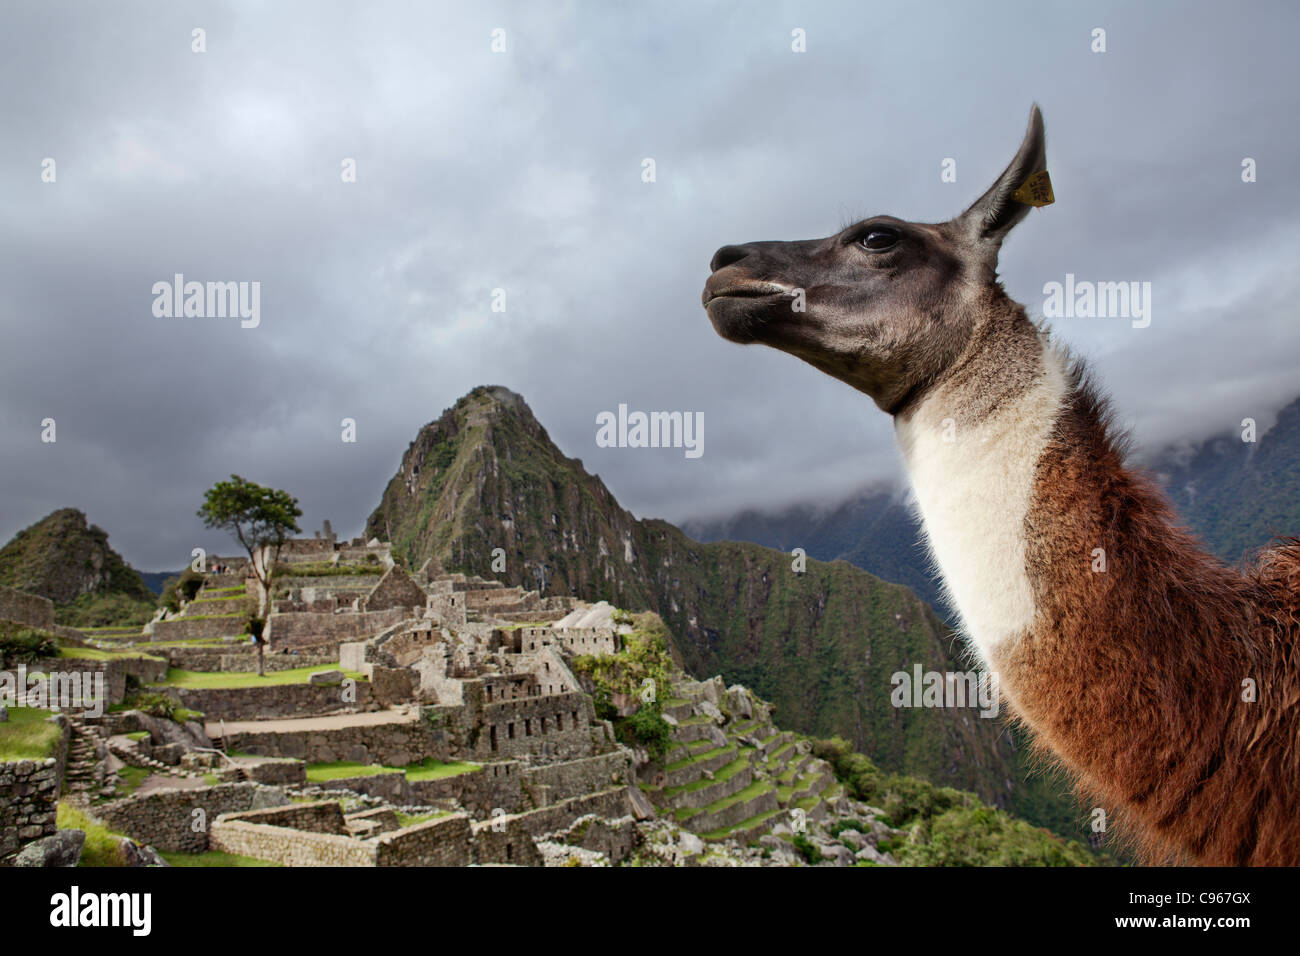 Llama at ancient Inca ruins of Machu Picchu, the most known tourist site in Andes mountains, Peru. Stock Photo